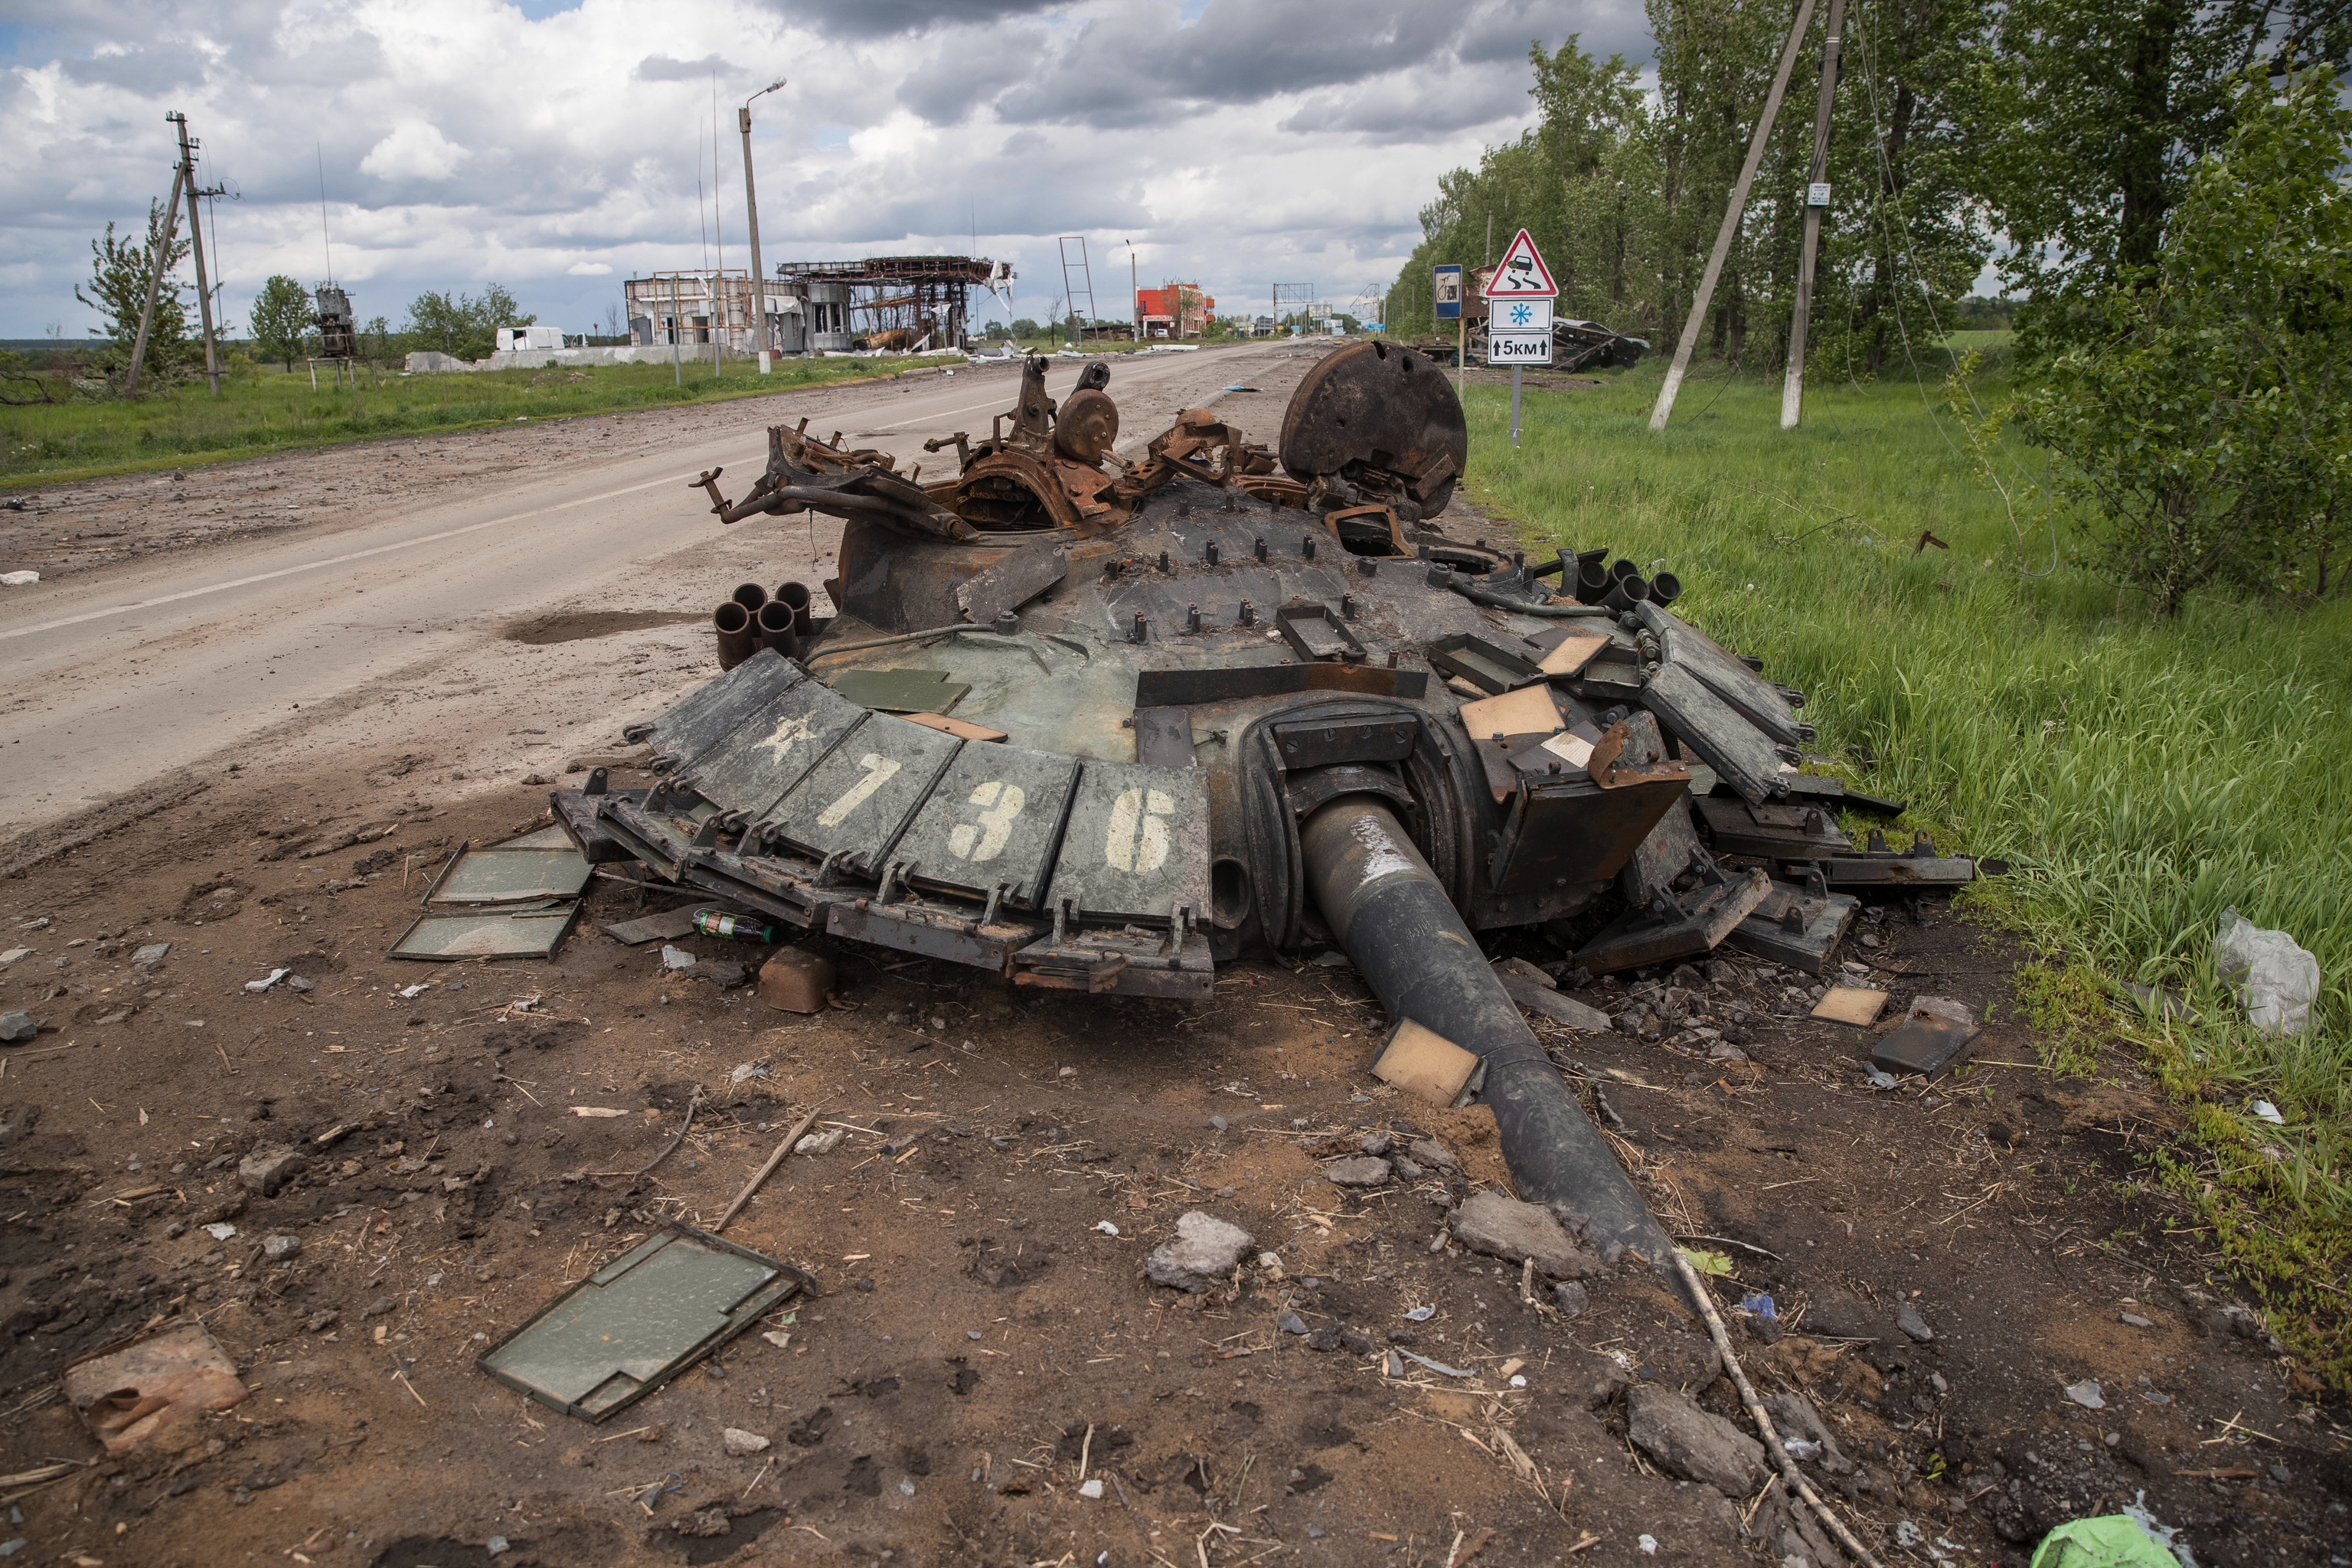 Remains of a tank on the outskirts of Kharkov, Ukraine.